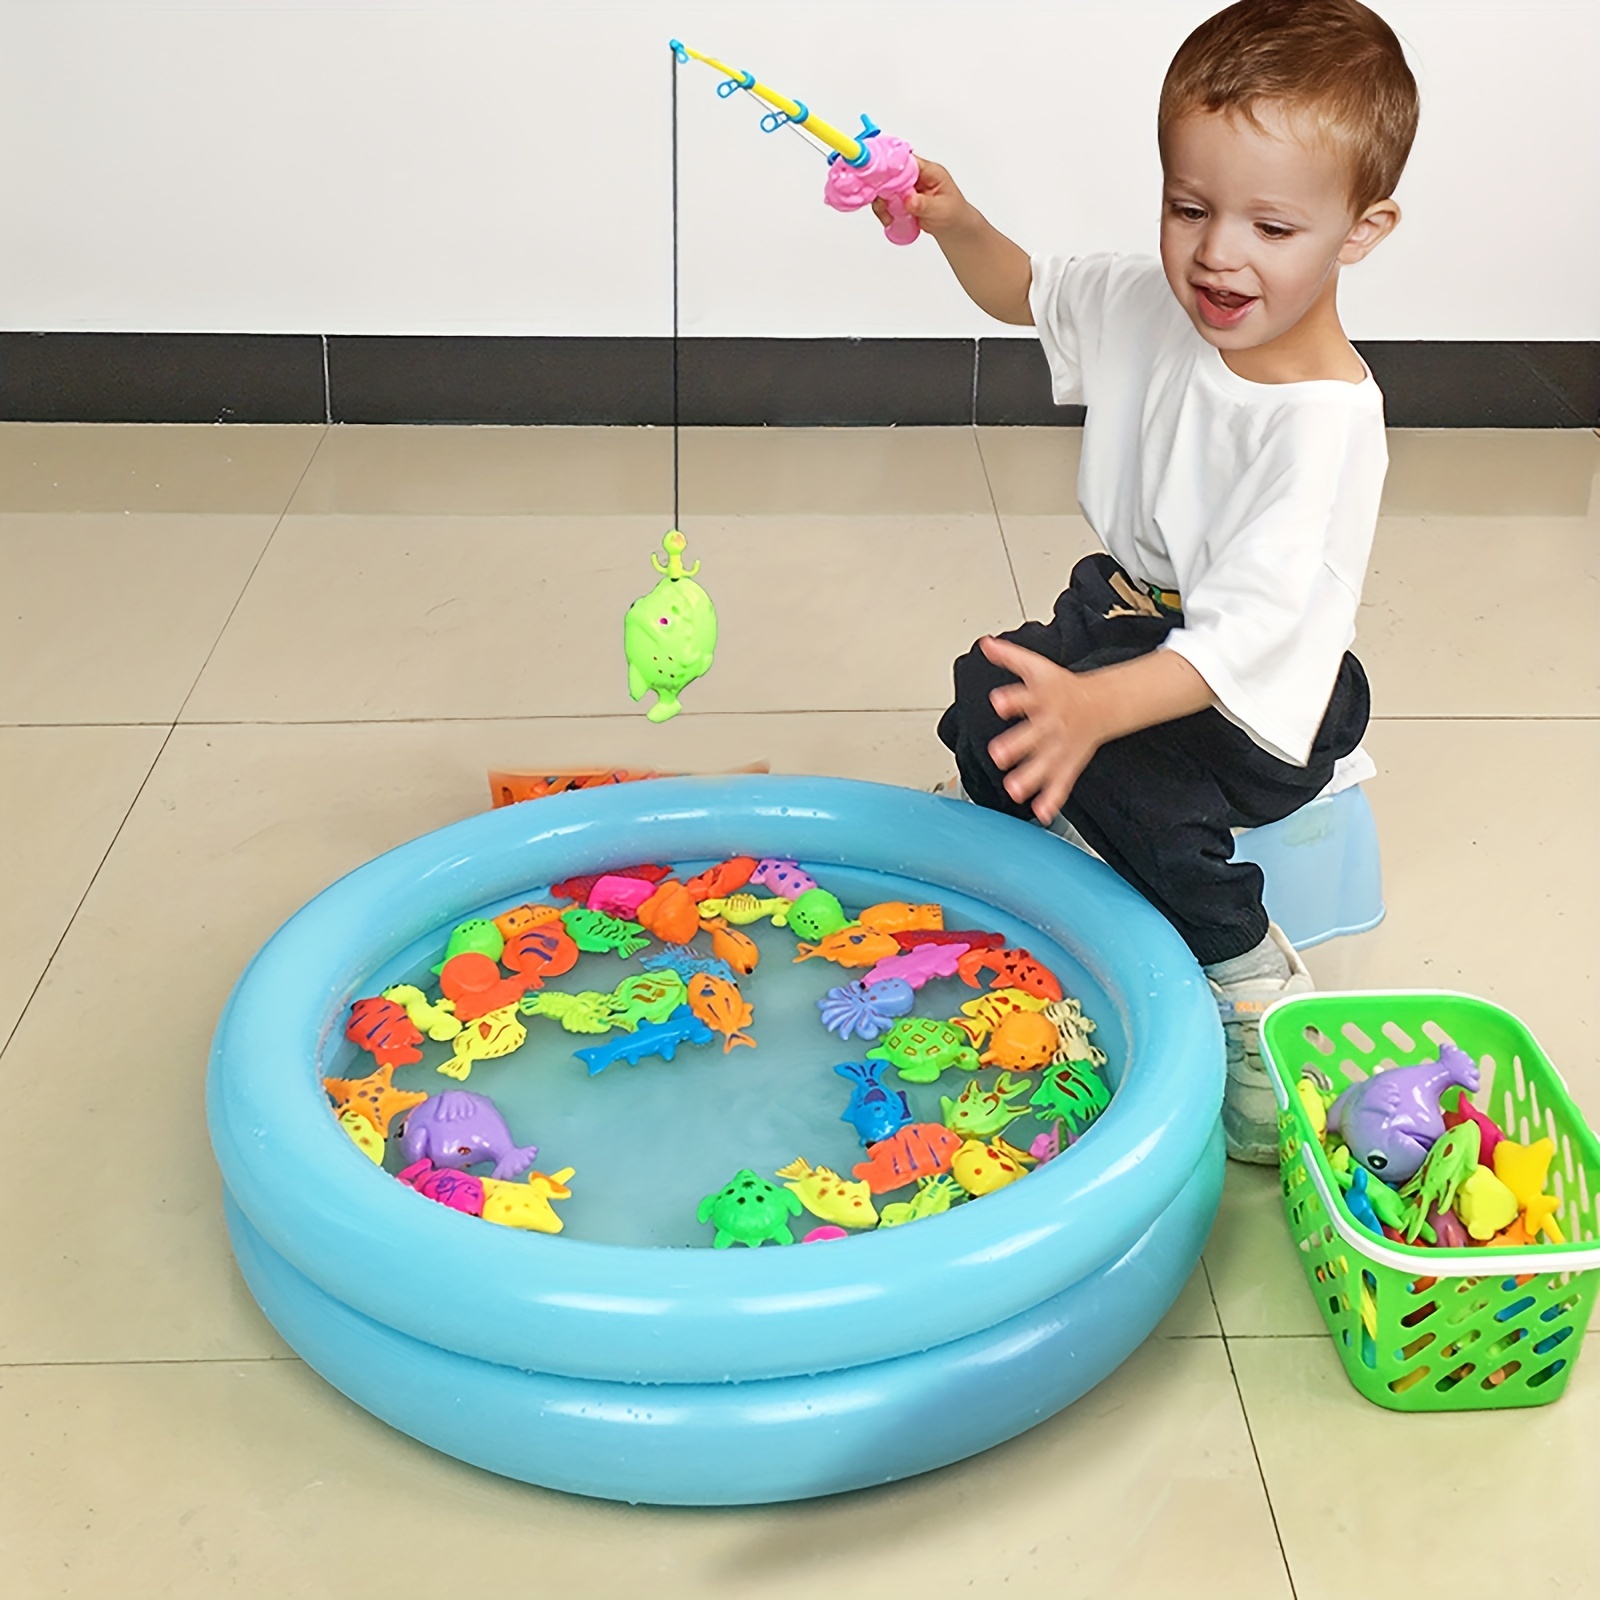 Fun Magnetic Fishing Game For Kids - Inflatable Swimming Pool Included!